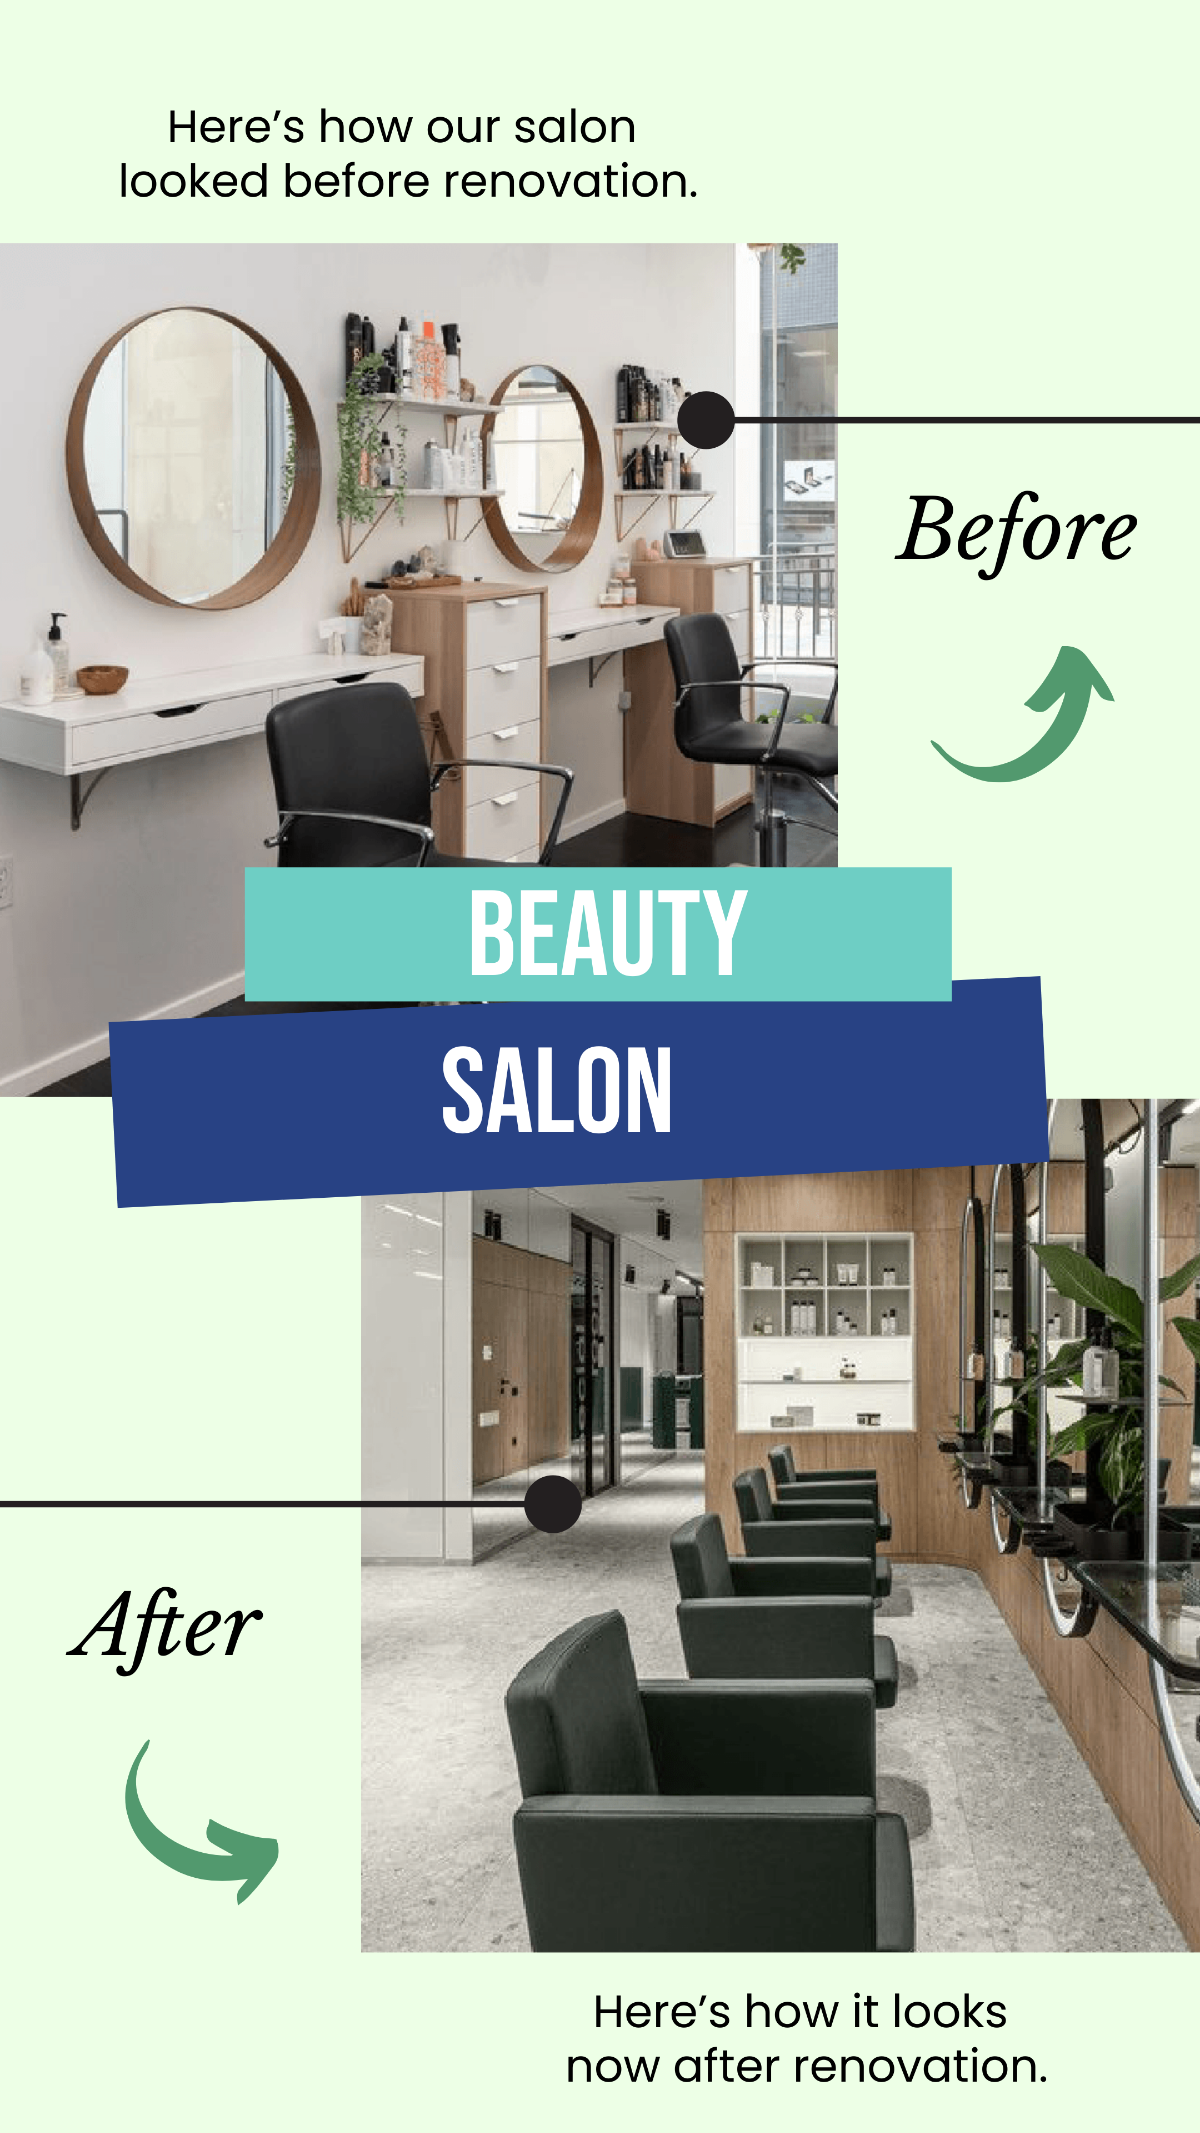 Tender Beauty Salon Before and After Instagram Post